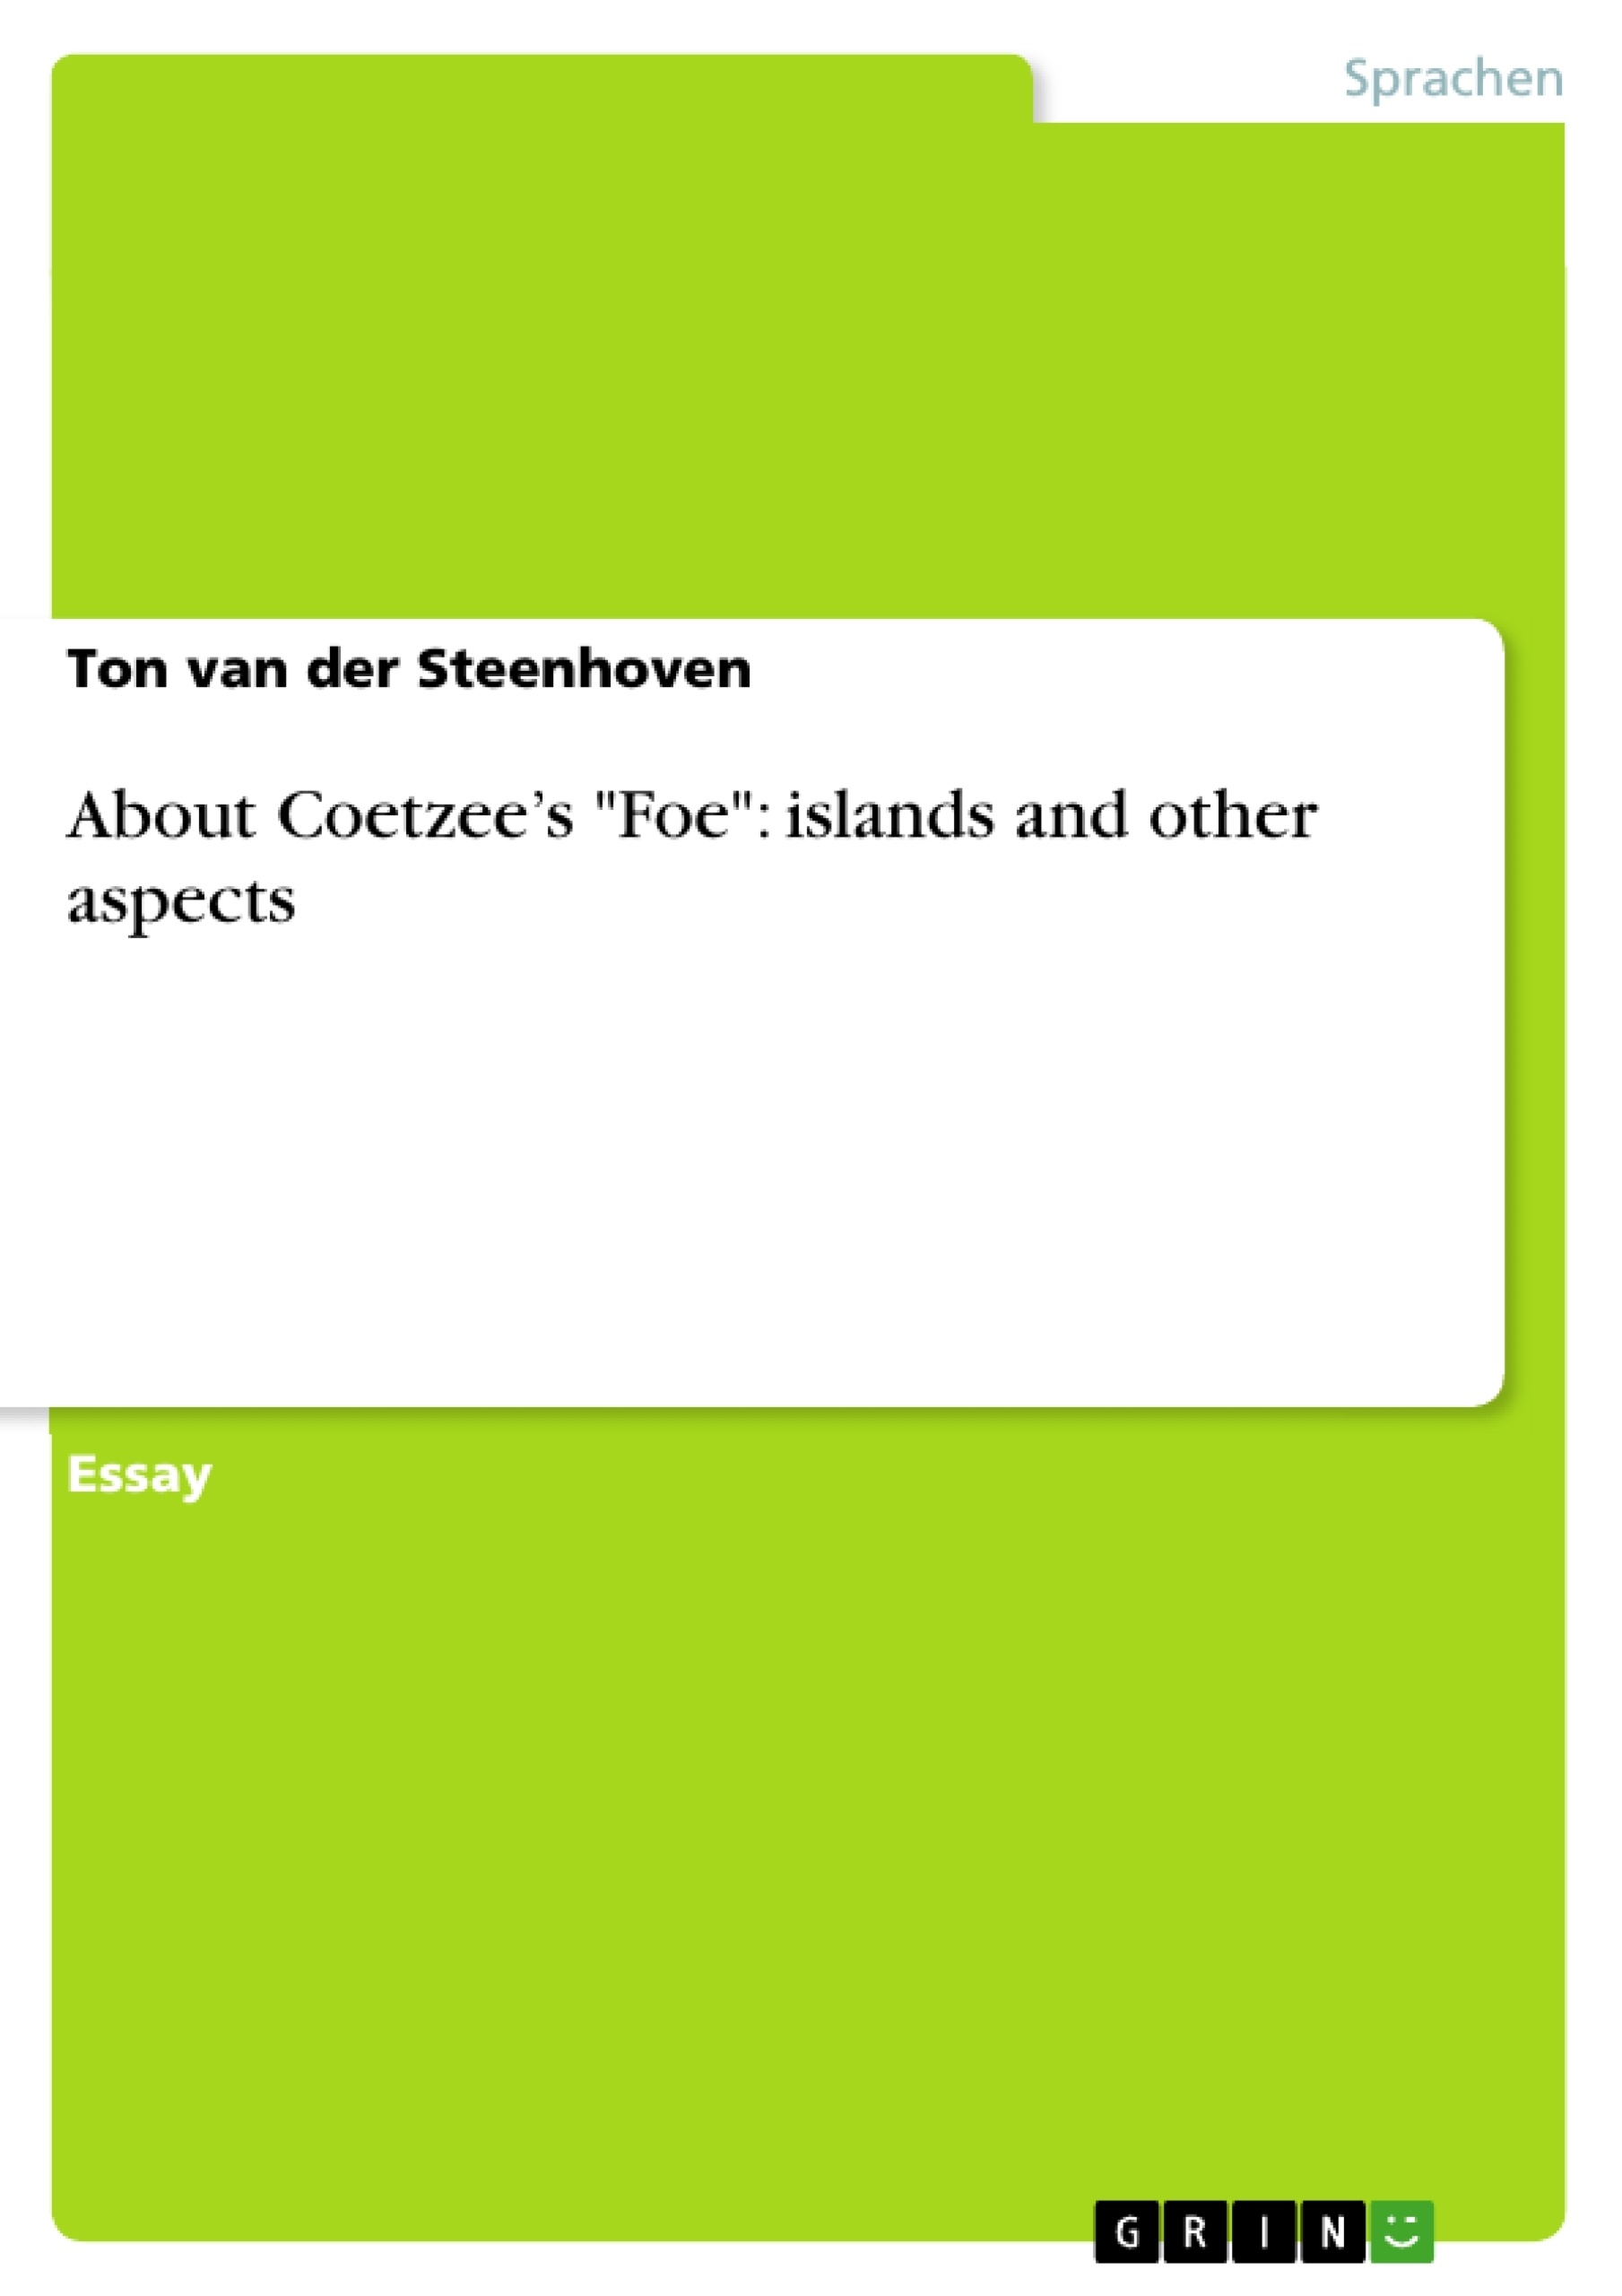 Titel: About Coetzee’s "Foe": islands and other aspects